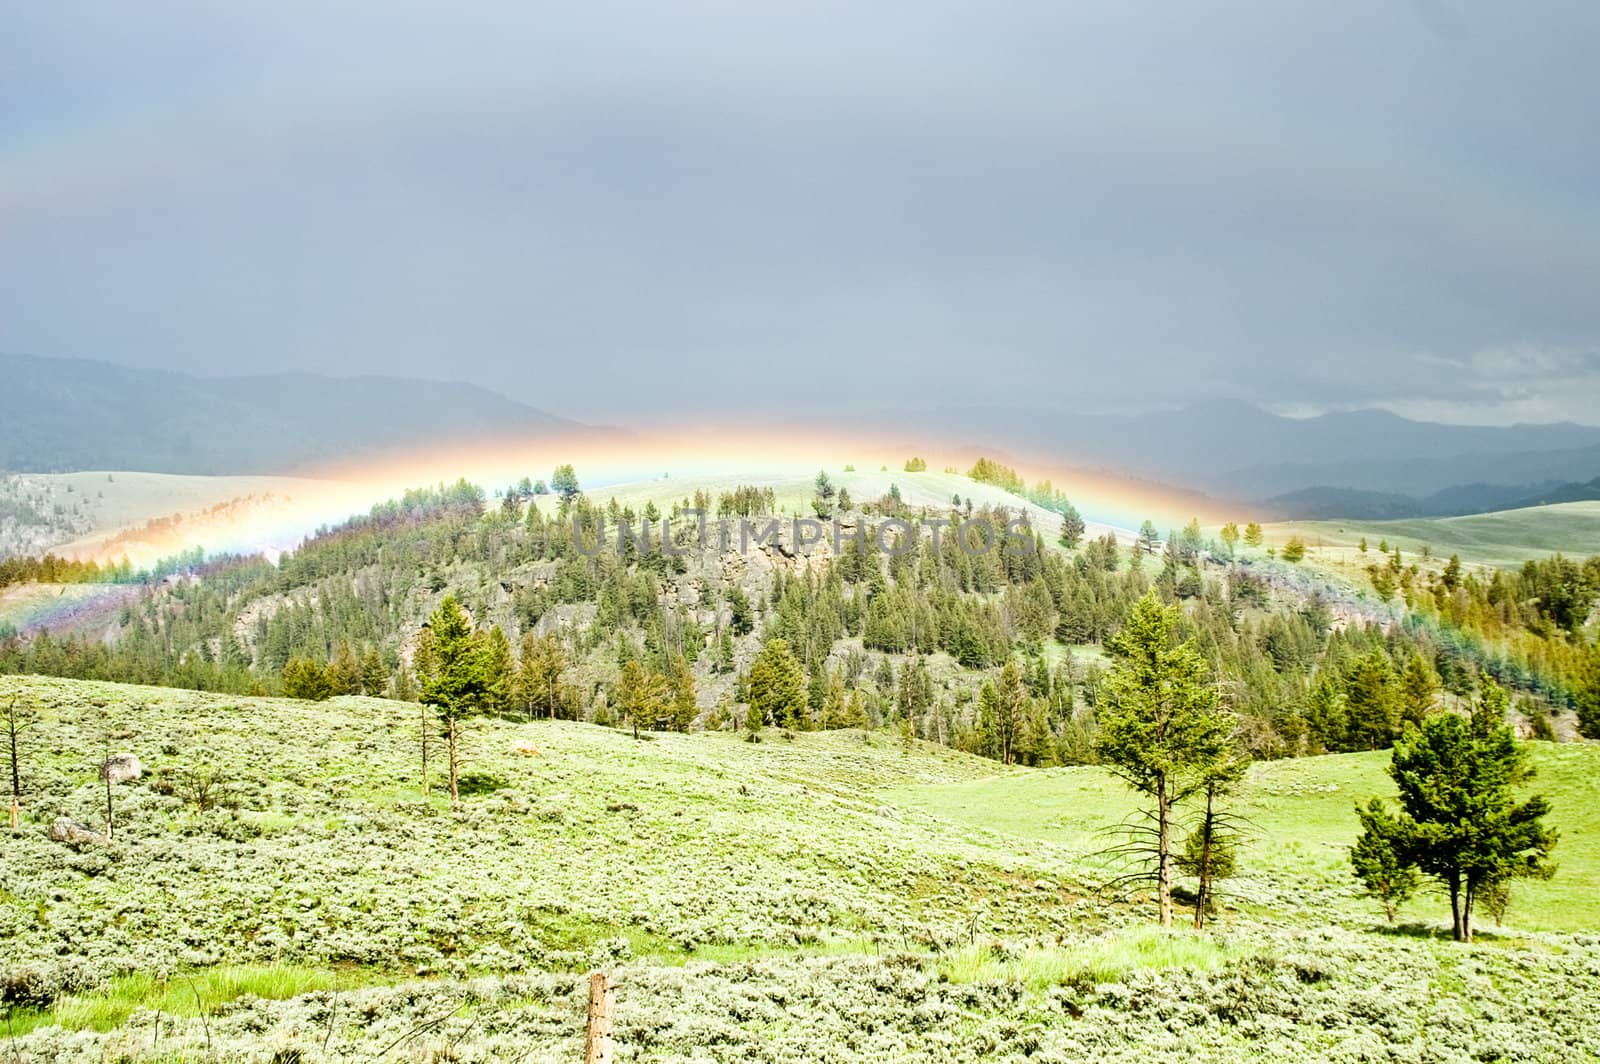 Rainbow hugs the contours of a hillside after storm Yellowstone Park